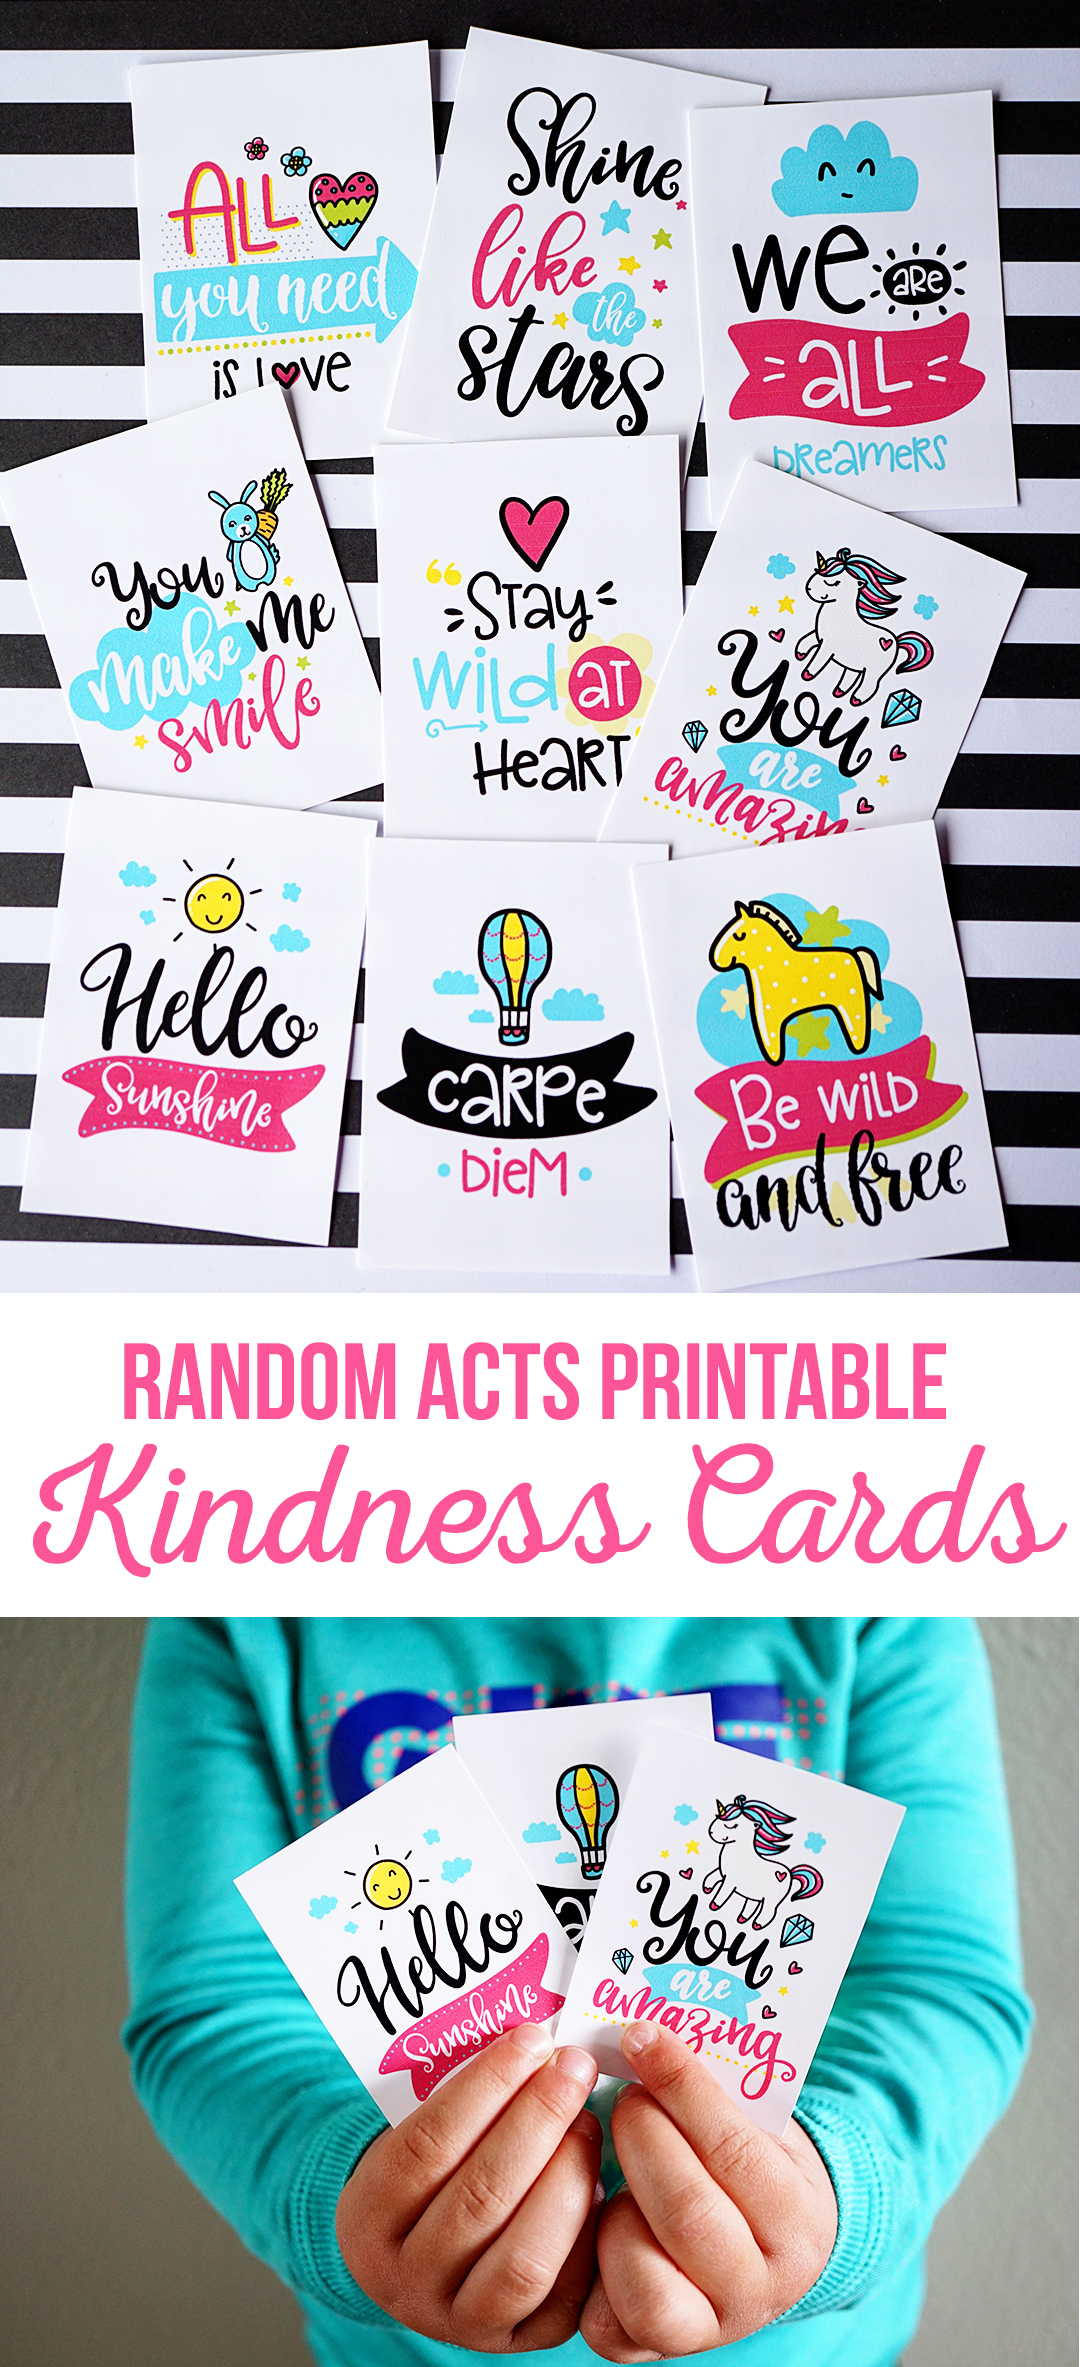 cards random acts kindness project printable service activities printables projects crafts notes thecraftingchicks quotes craft trendy activity worksheets mindfulness teaching